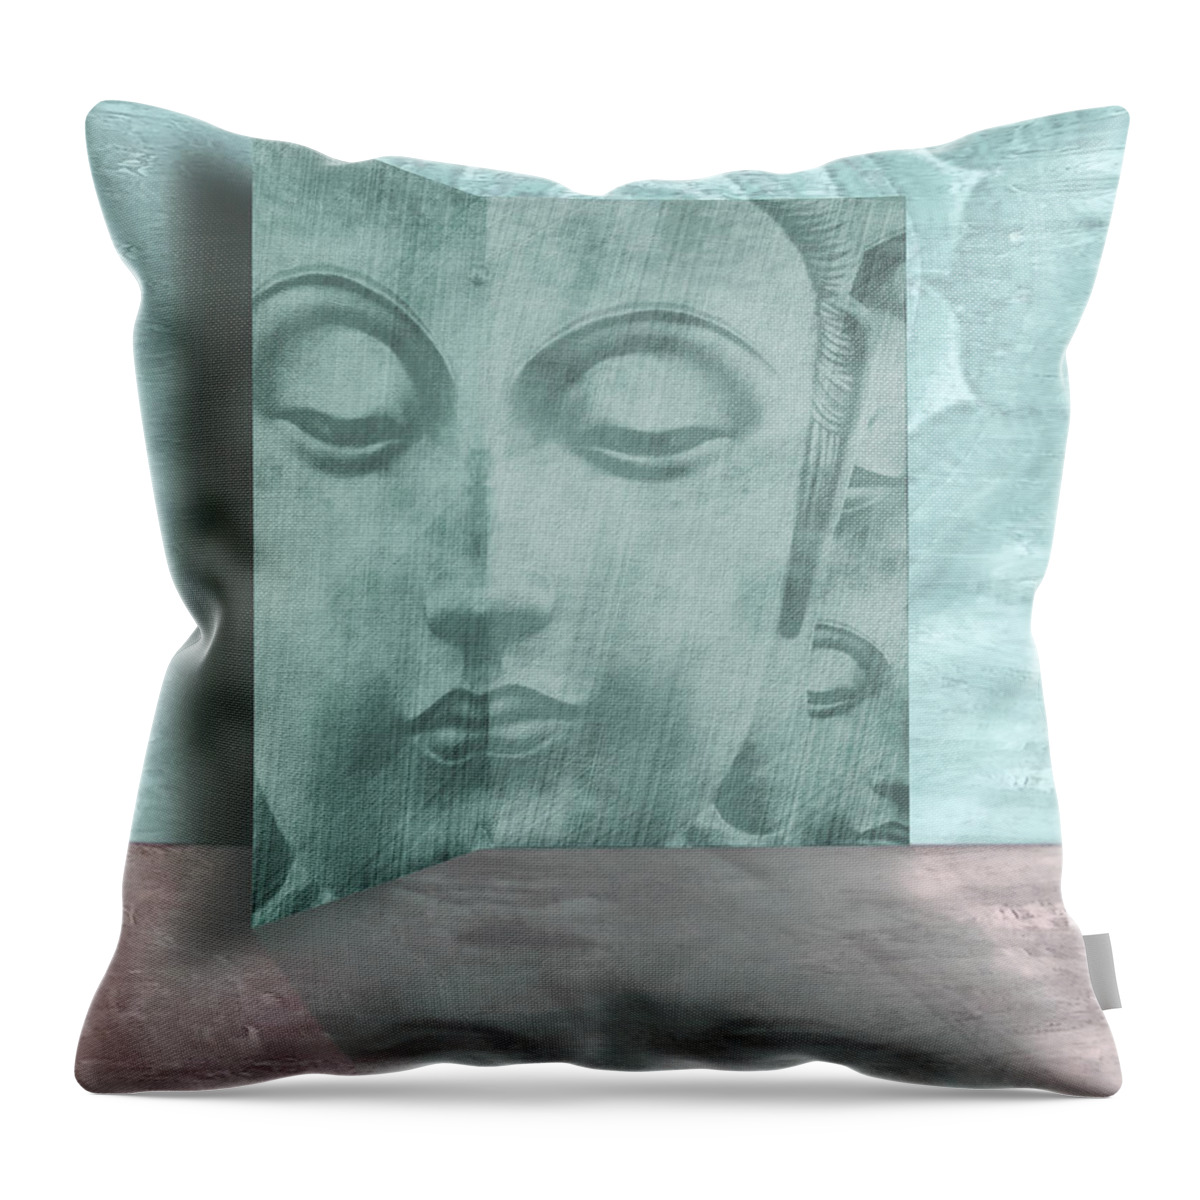 Abstract Throw Pillow featuring the digital art Gallery by Deborah Smith